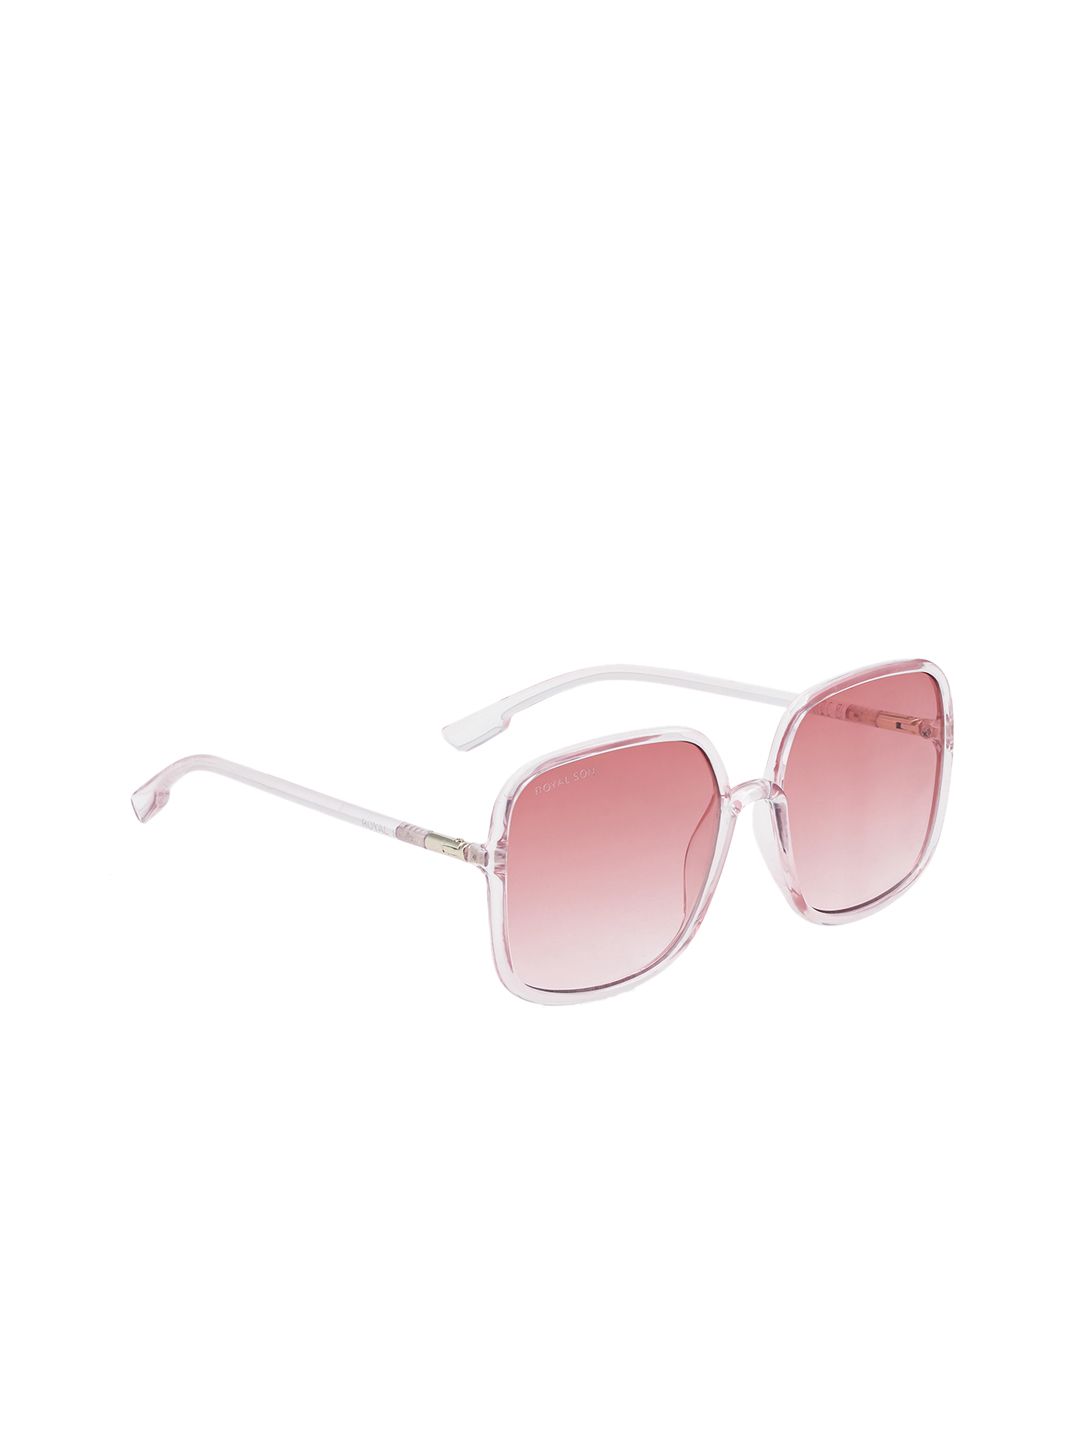 ROYAL SON Women Oversized UV Protected Sunglasses CHI0096-C3 Price in India